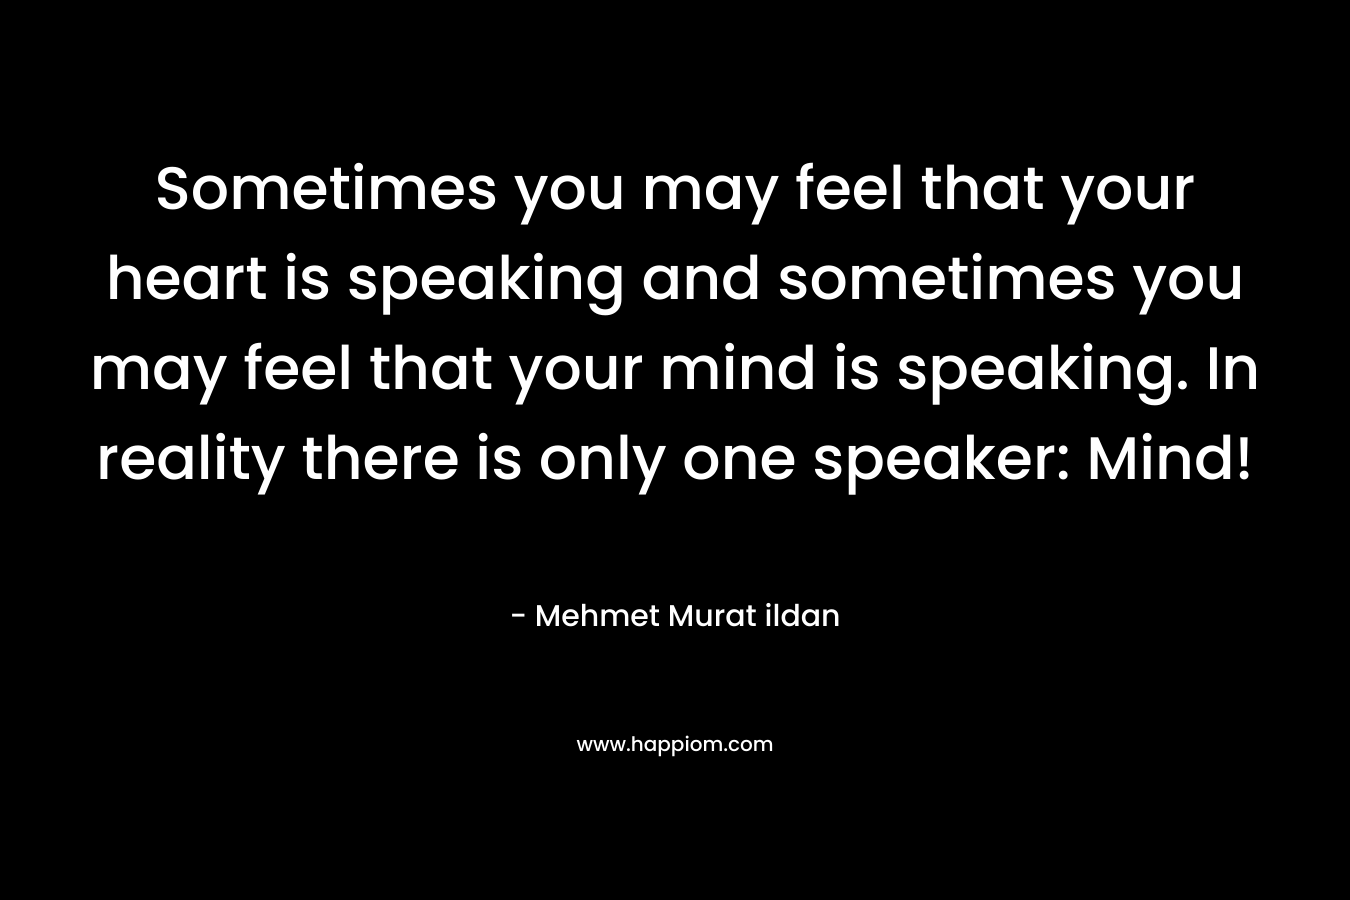 Sometimes you may feel that your heart is speaking and sometimes you may feel that your mind is speaking. In reality there is only one speaker: Mind!